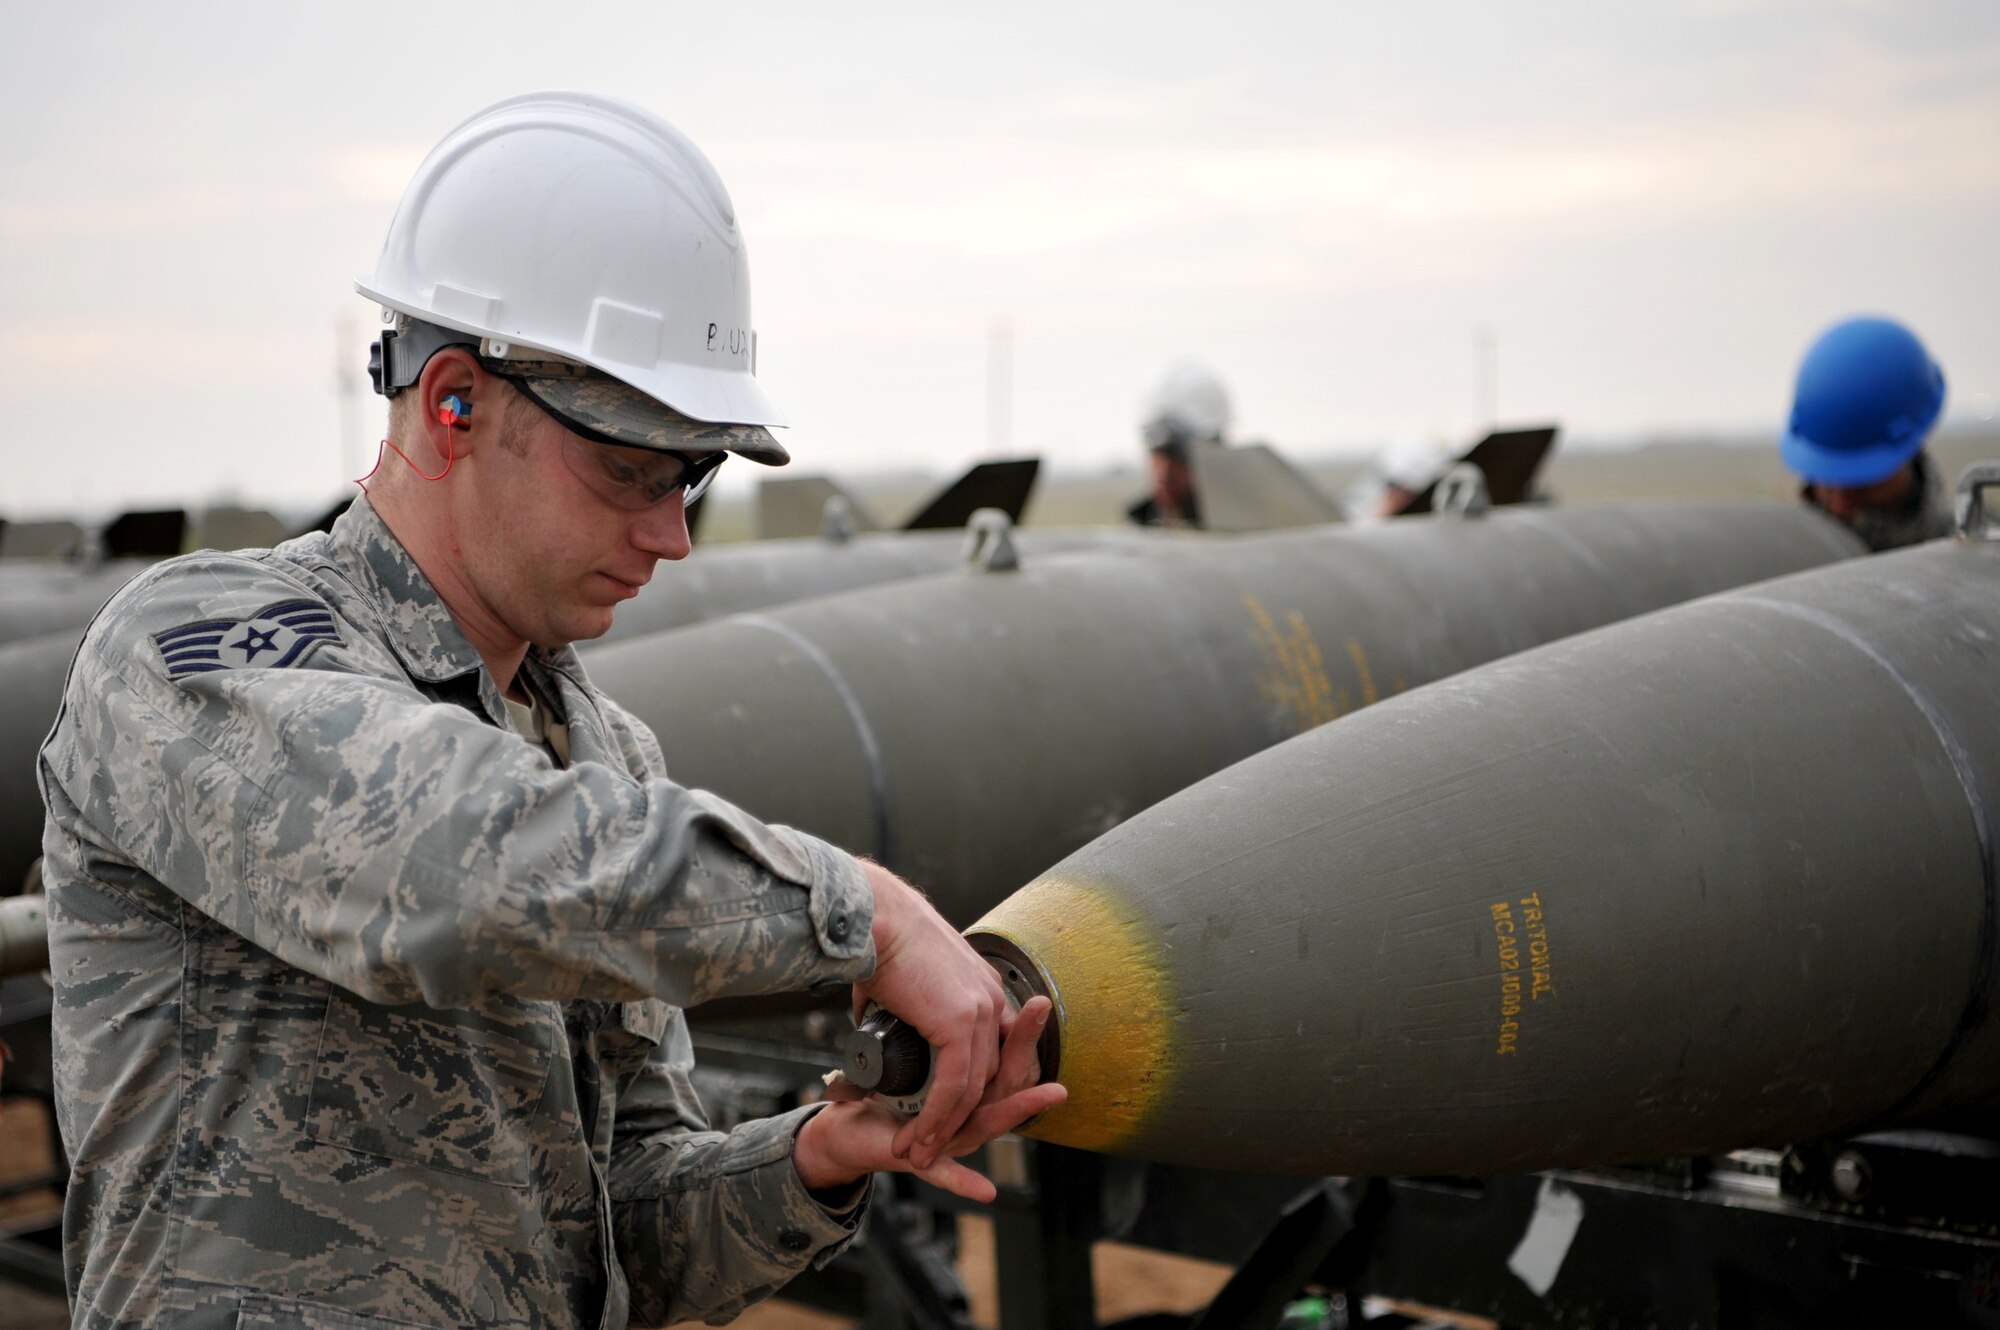 Enlisted Airmen and officers work together to build munitions at the munitions pad Dec. 13, 2016, at Beale Air Force Base, California. The munitions build is part of the Senior Officer Orientation course that immerses and familiarizes officers with the core training enlisted Airmen receive in the munitions career field. (U.S. Air Force photo/Staff Sgt. Jeffrey Schultze)